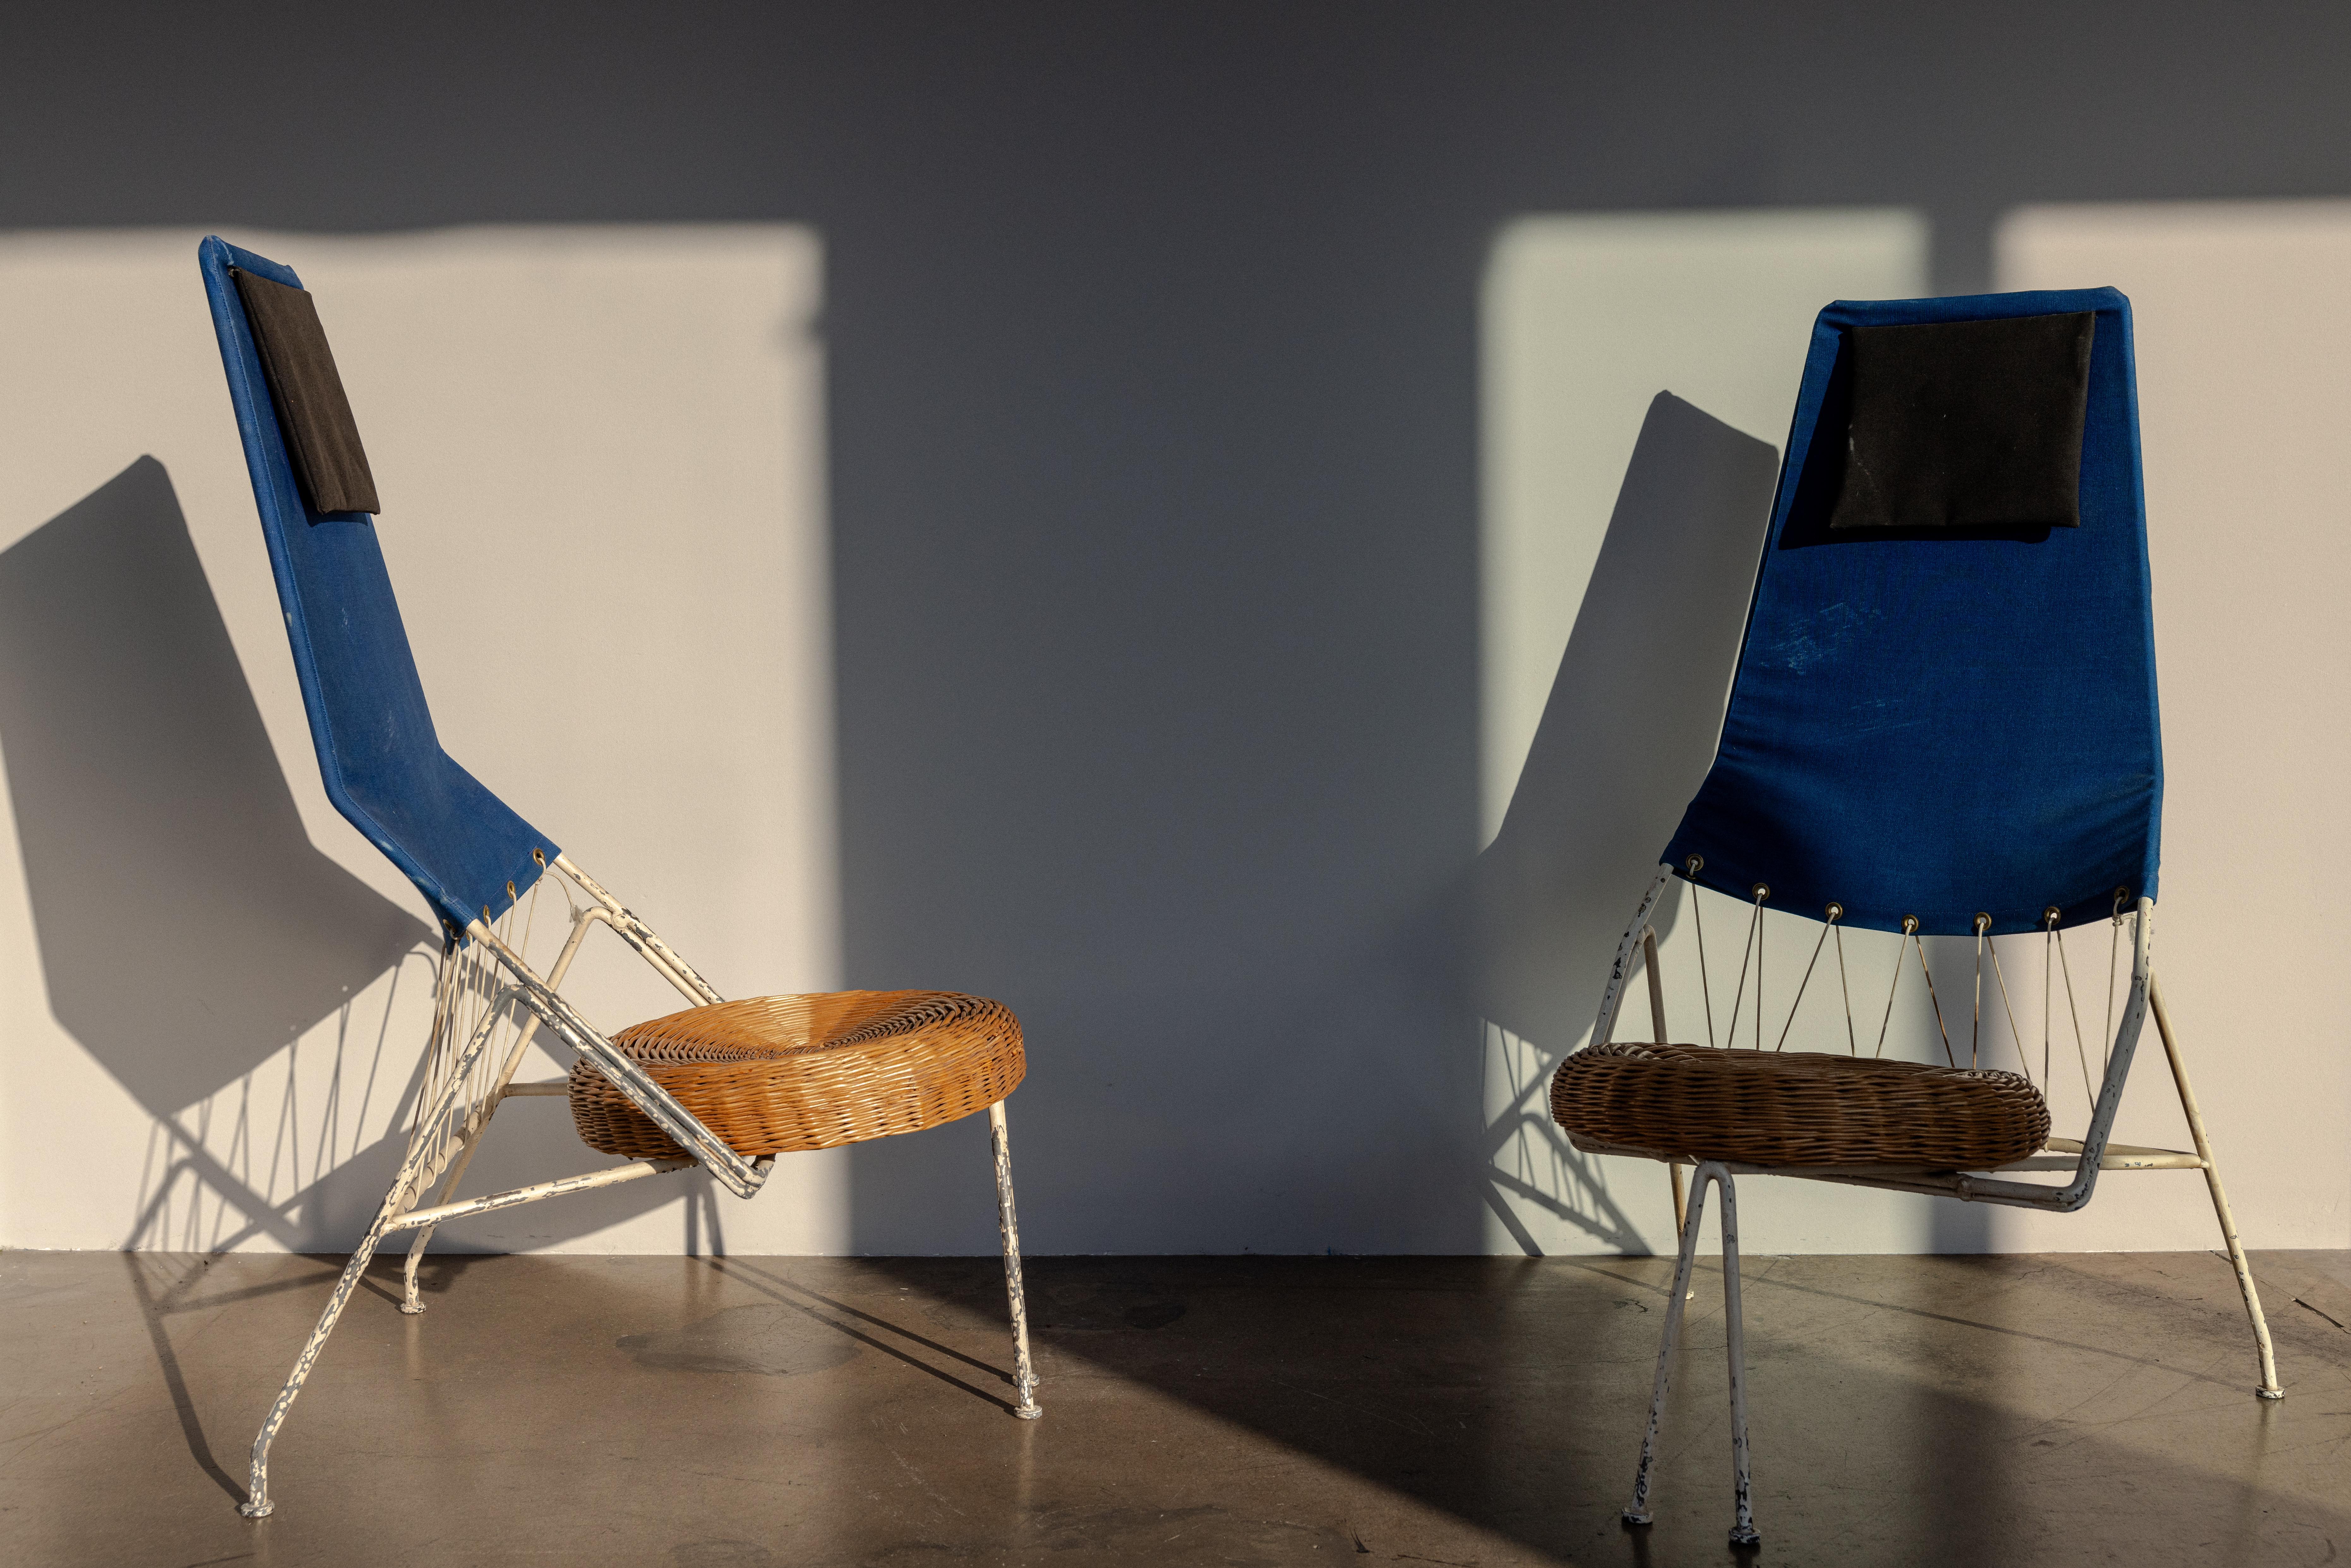 Pair of Triangular Lounge Chairs by Tony Paul, c. 1954, USA
Enameled Steel with Canvas and Rattan Seats

H 42